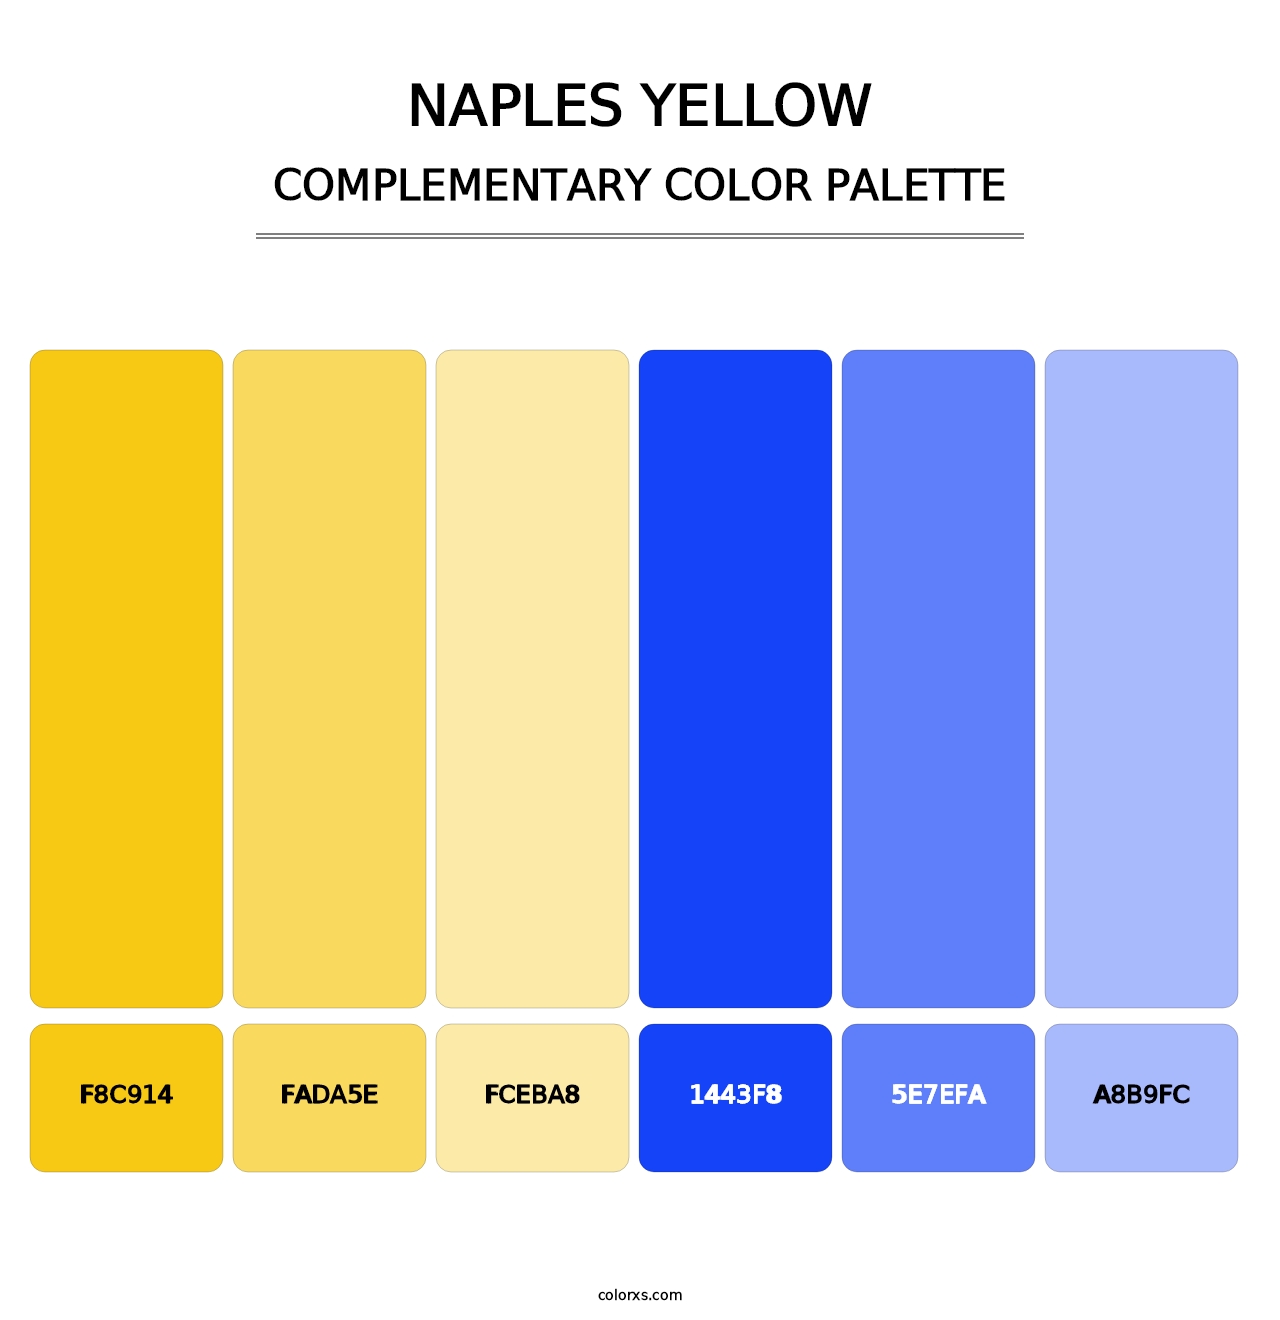 Naples Yellow - Complementary Color Palette